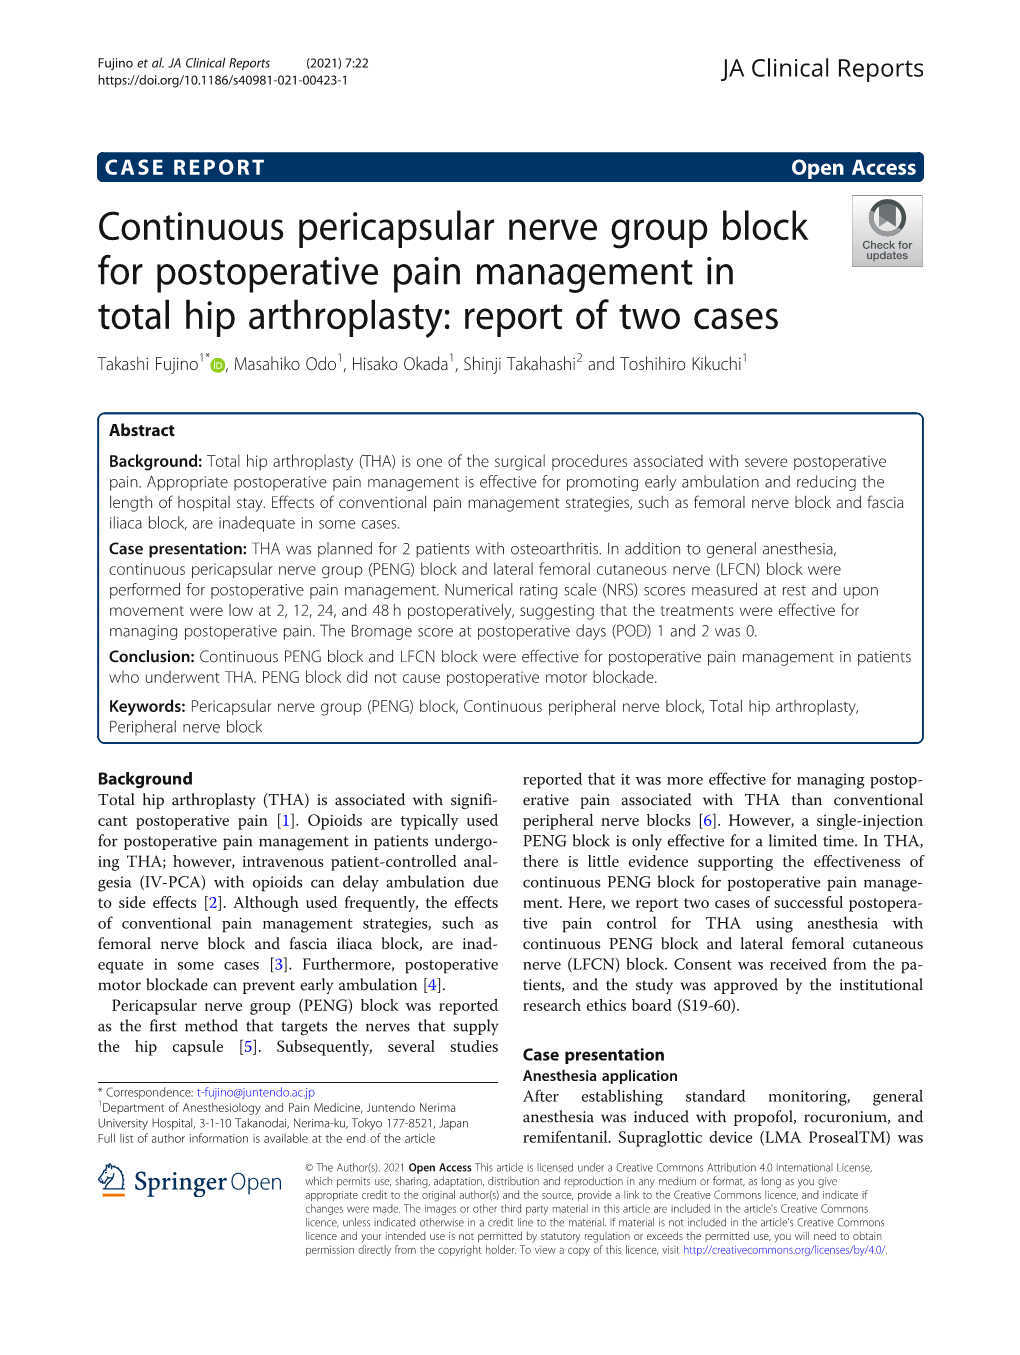 Continuous Pericapsular Nerve Group Block for Postoperative Pain